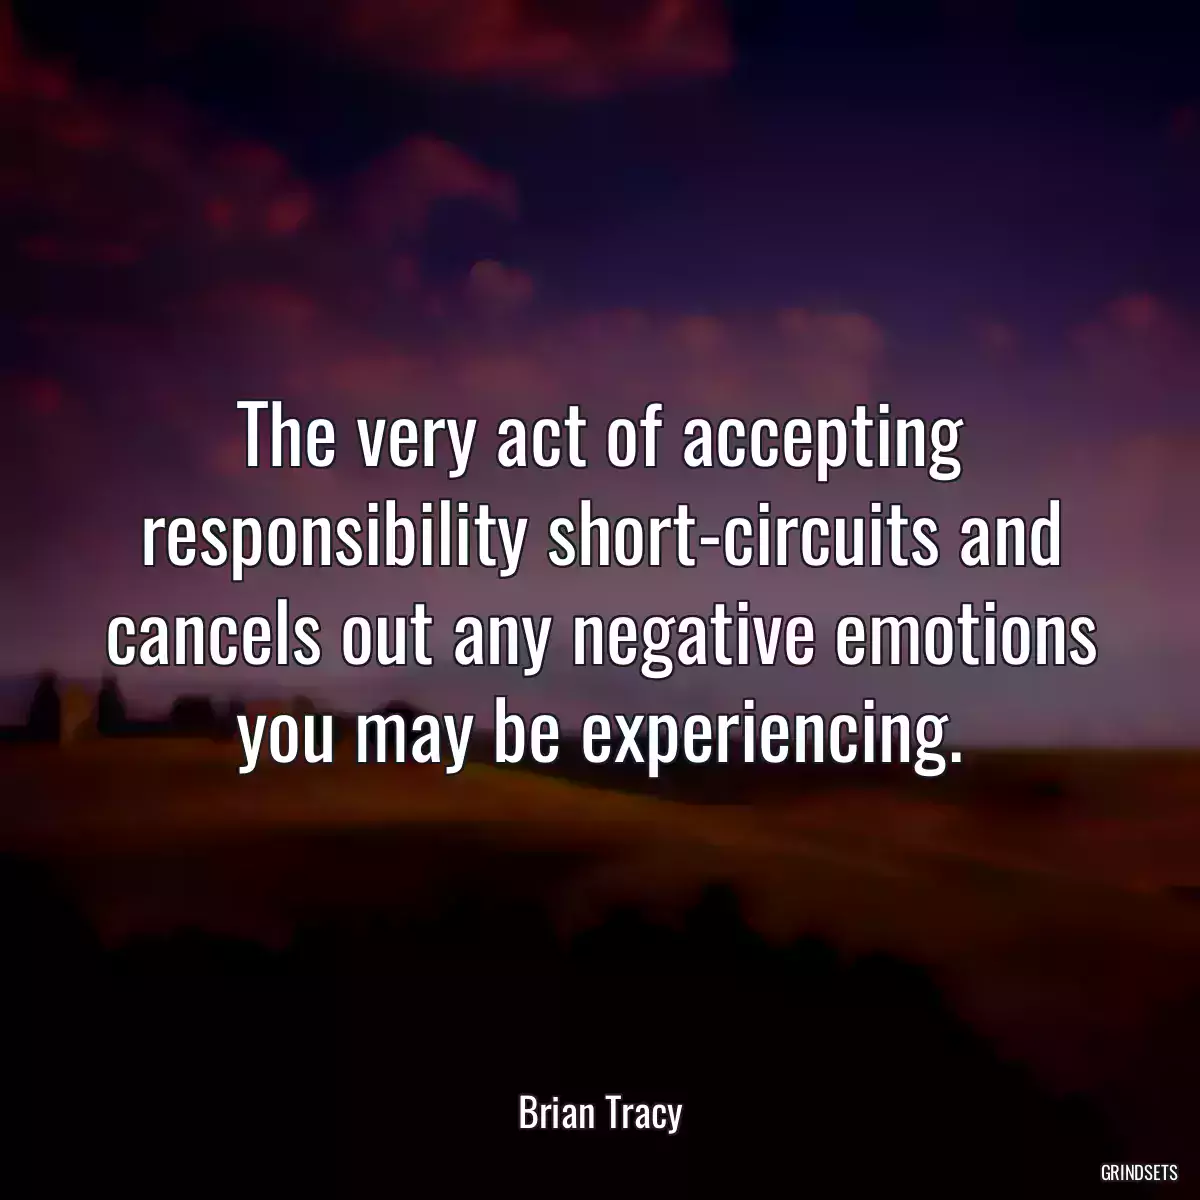 The very act of accepting responsibility short-circuits and cancels out any negative emotions you may be experiencing.